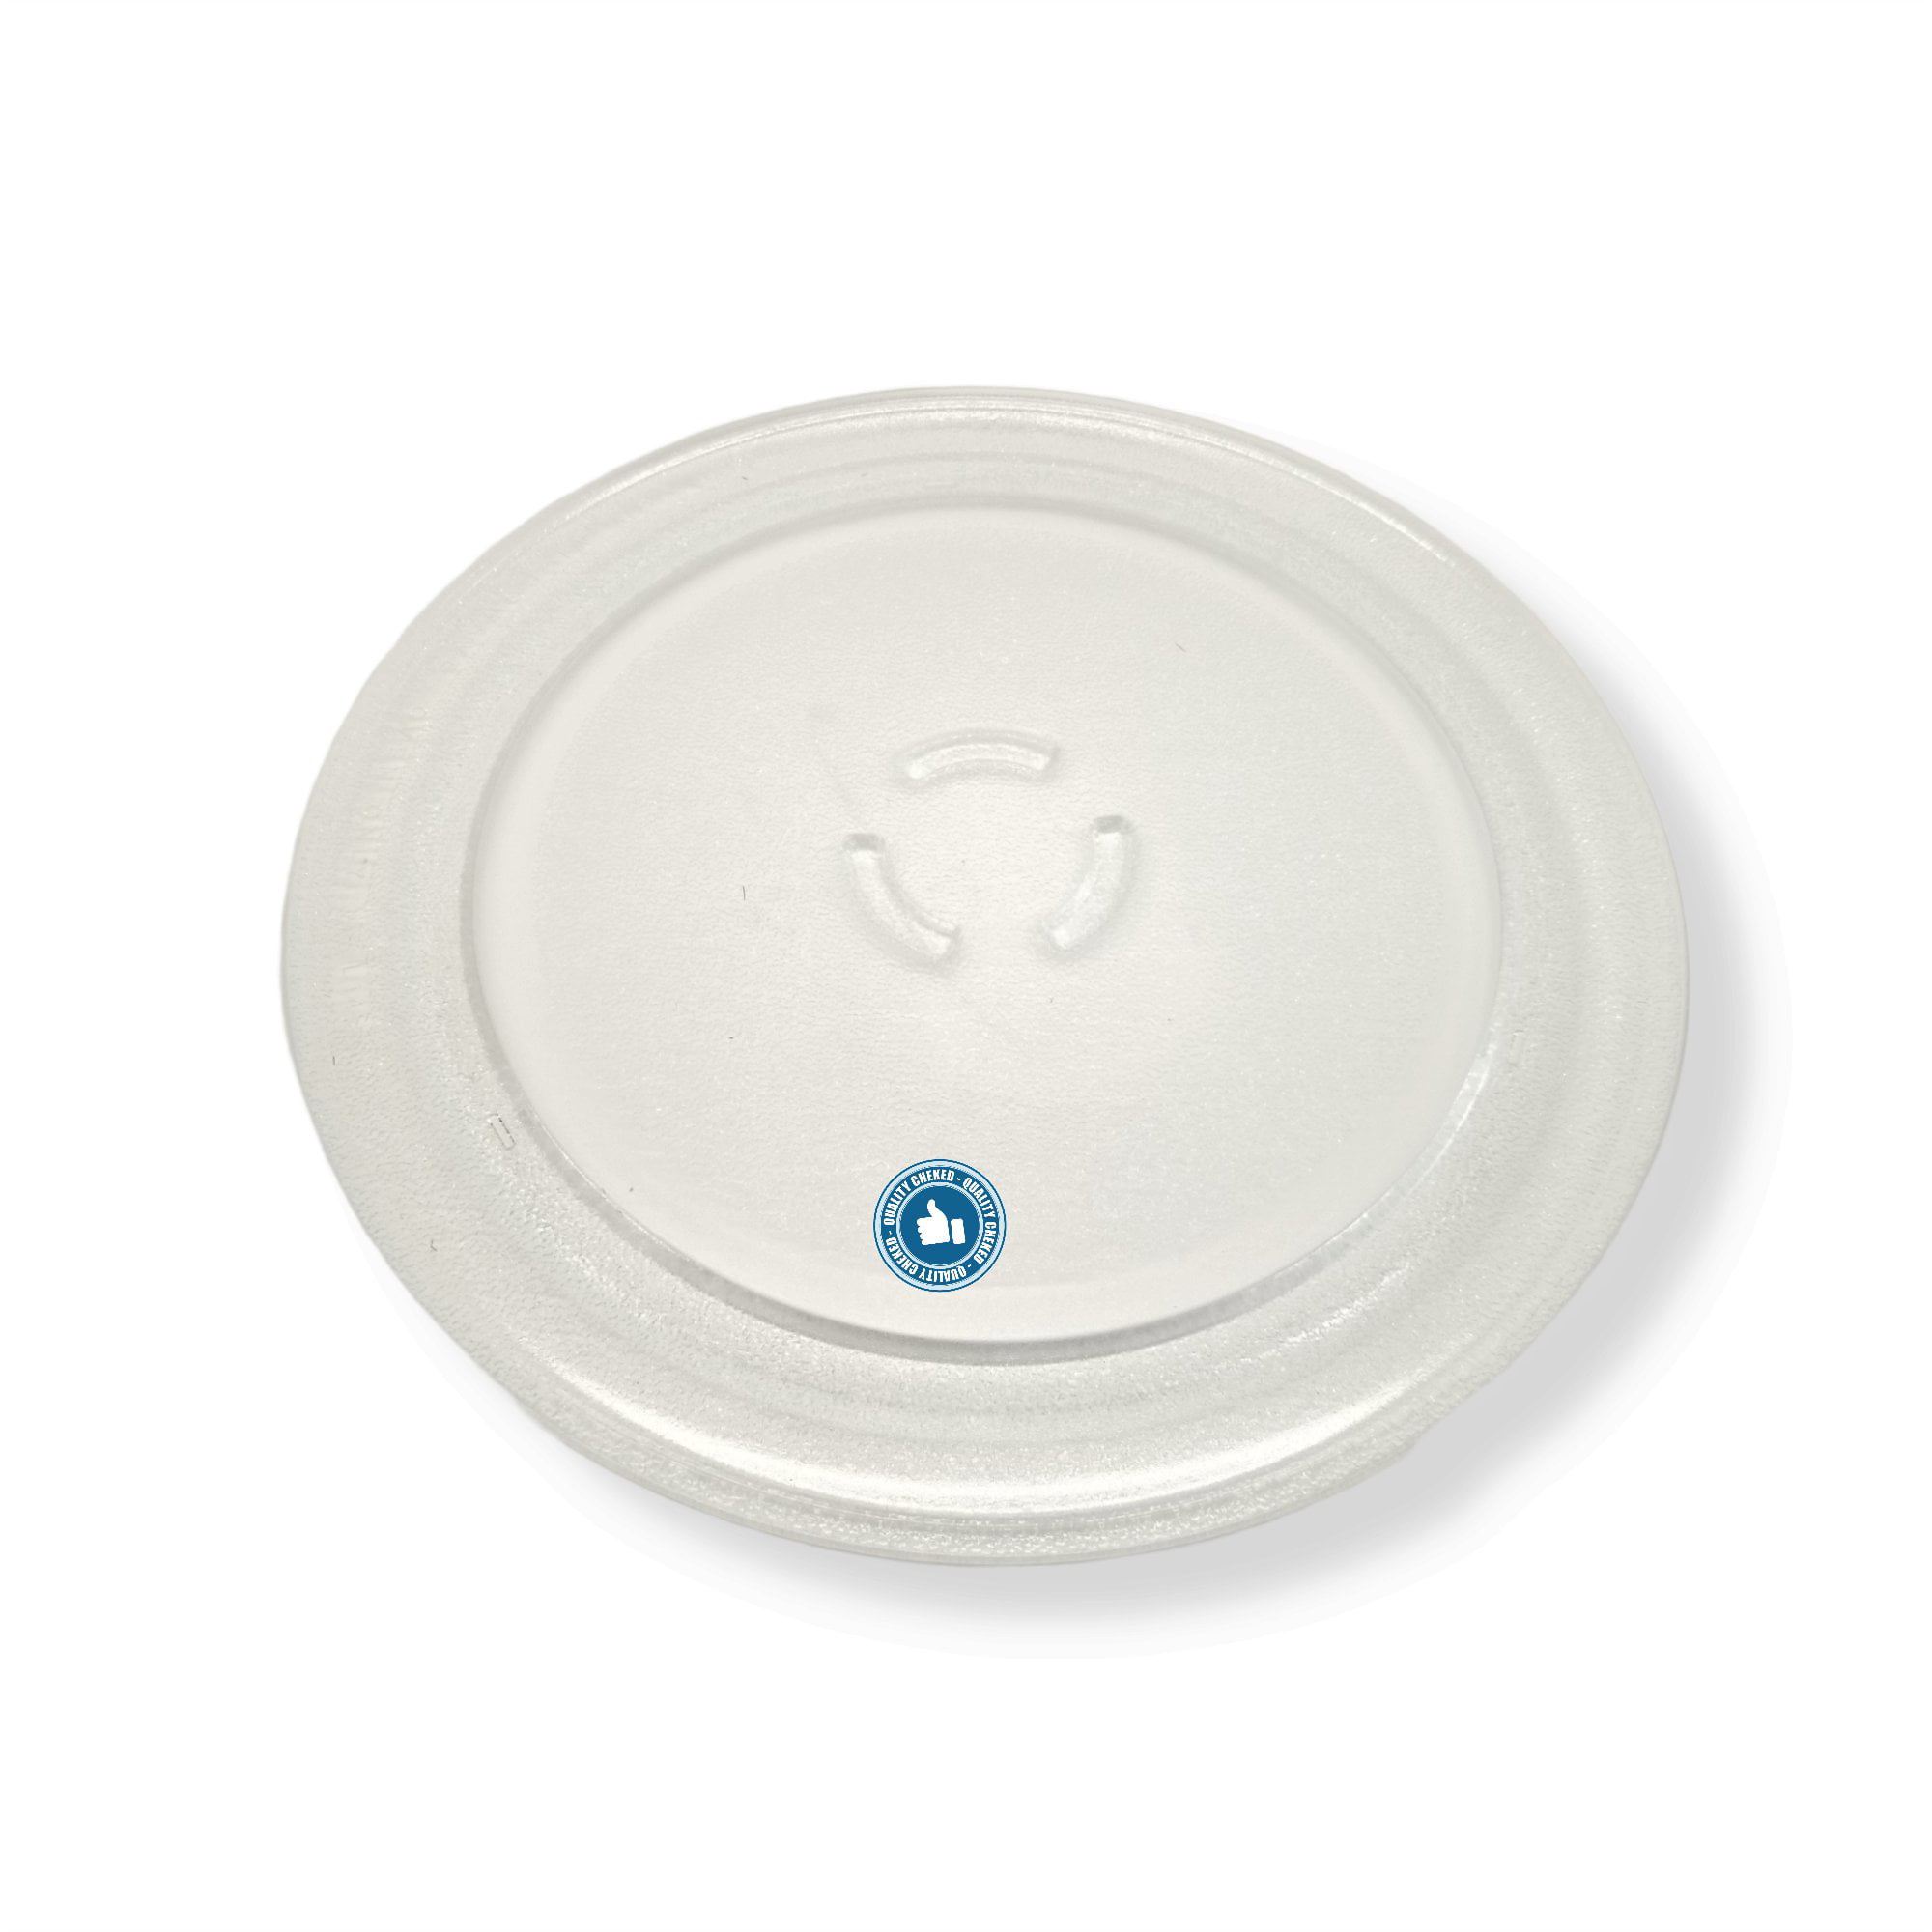 Whirlpool 30QBP4185 Cook Tray for sale online 